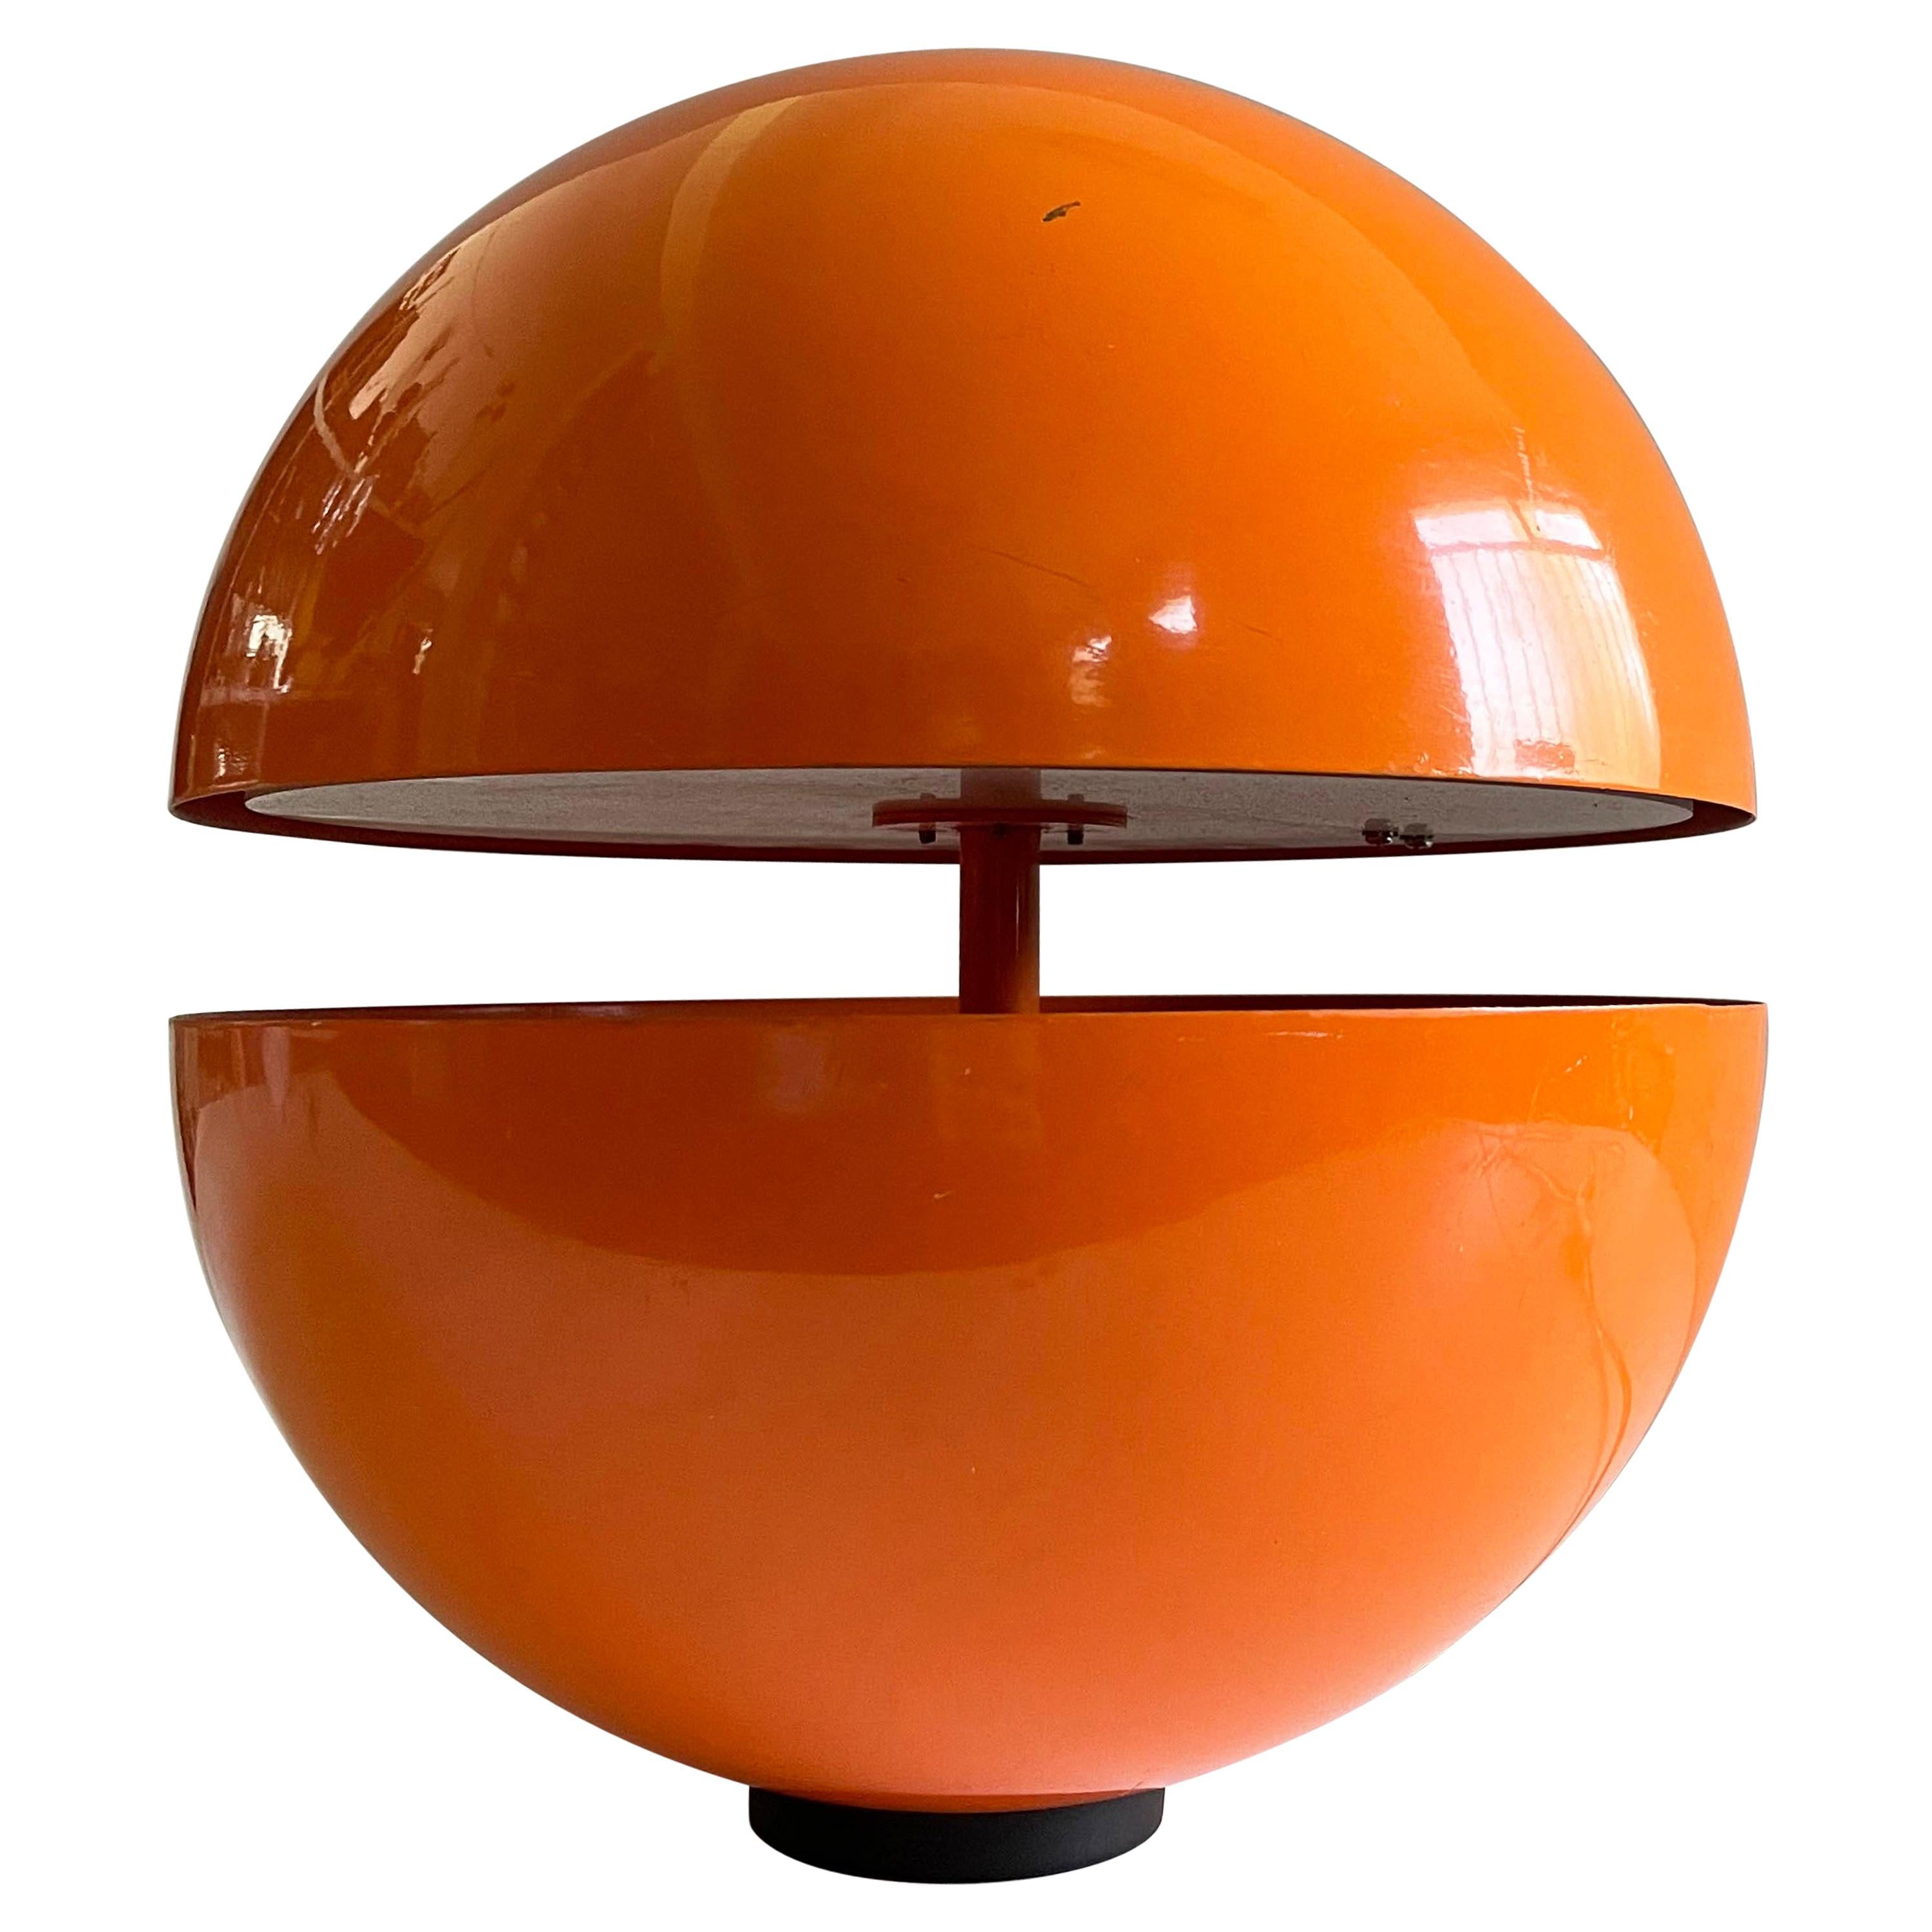 Vintage Orange Globe Table Lamp by Andrea Modica for Lumess, 1980s